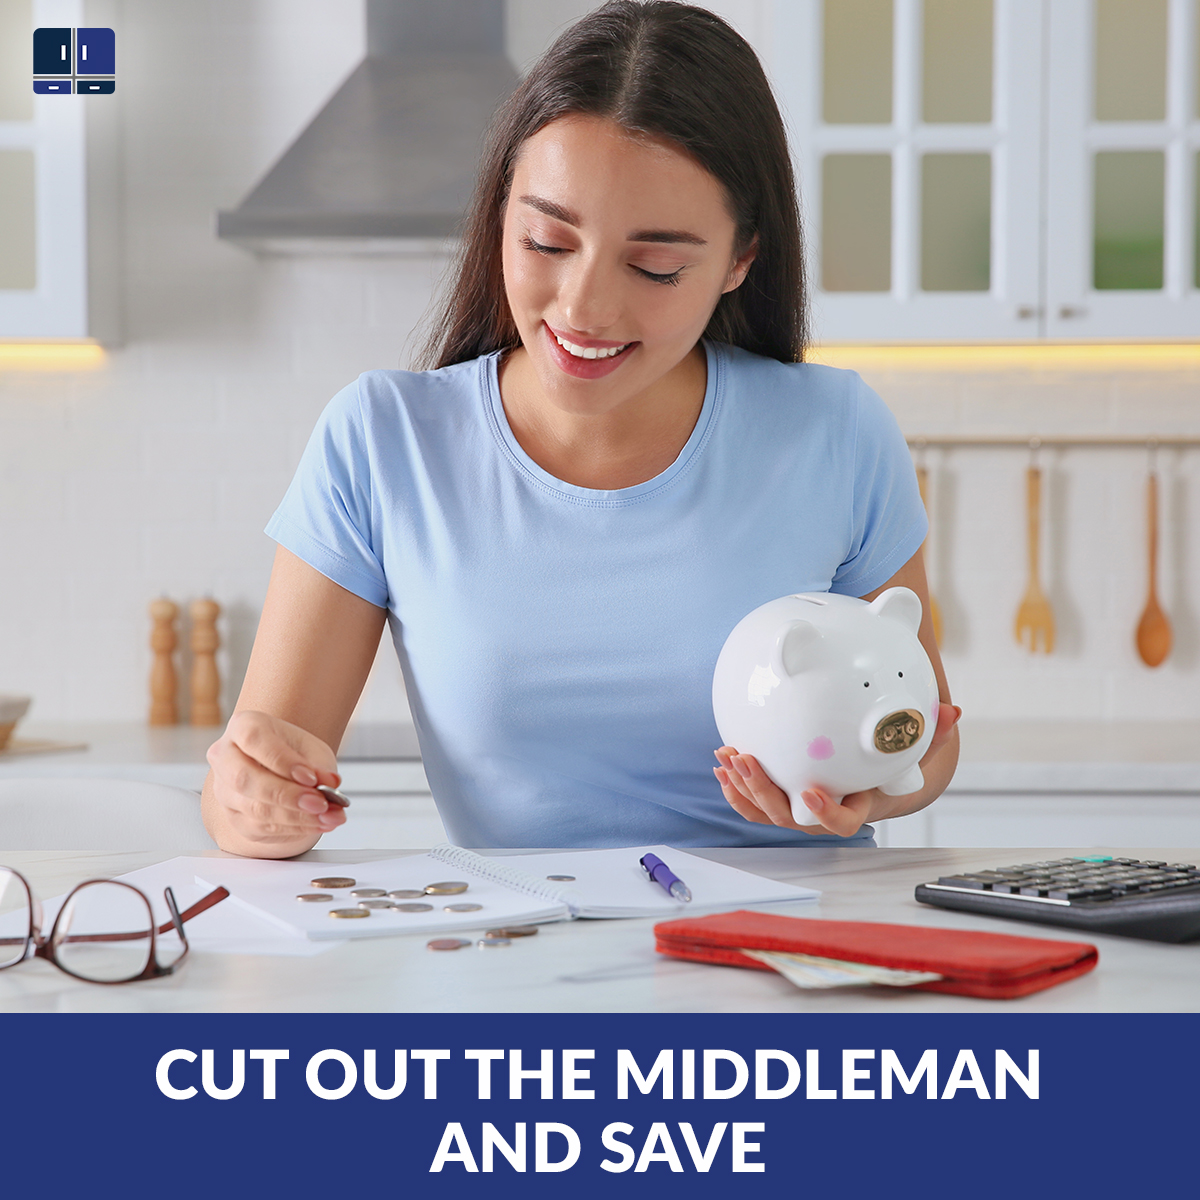 Cut out the middleman and save